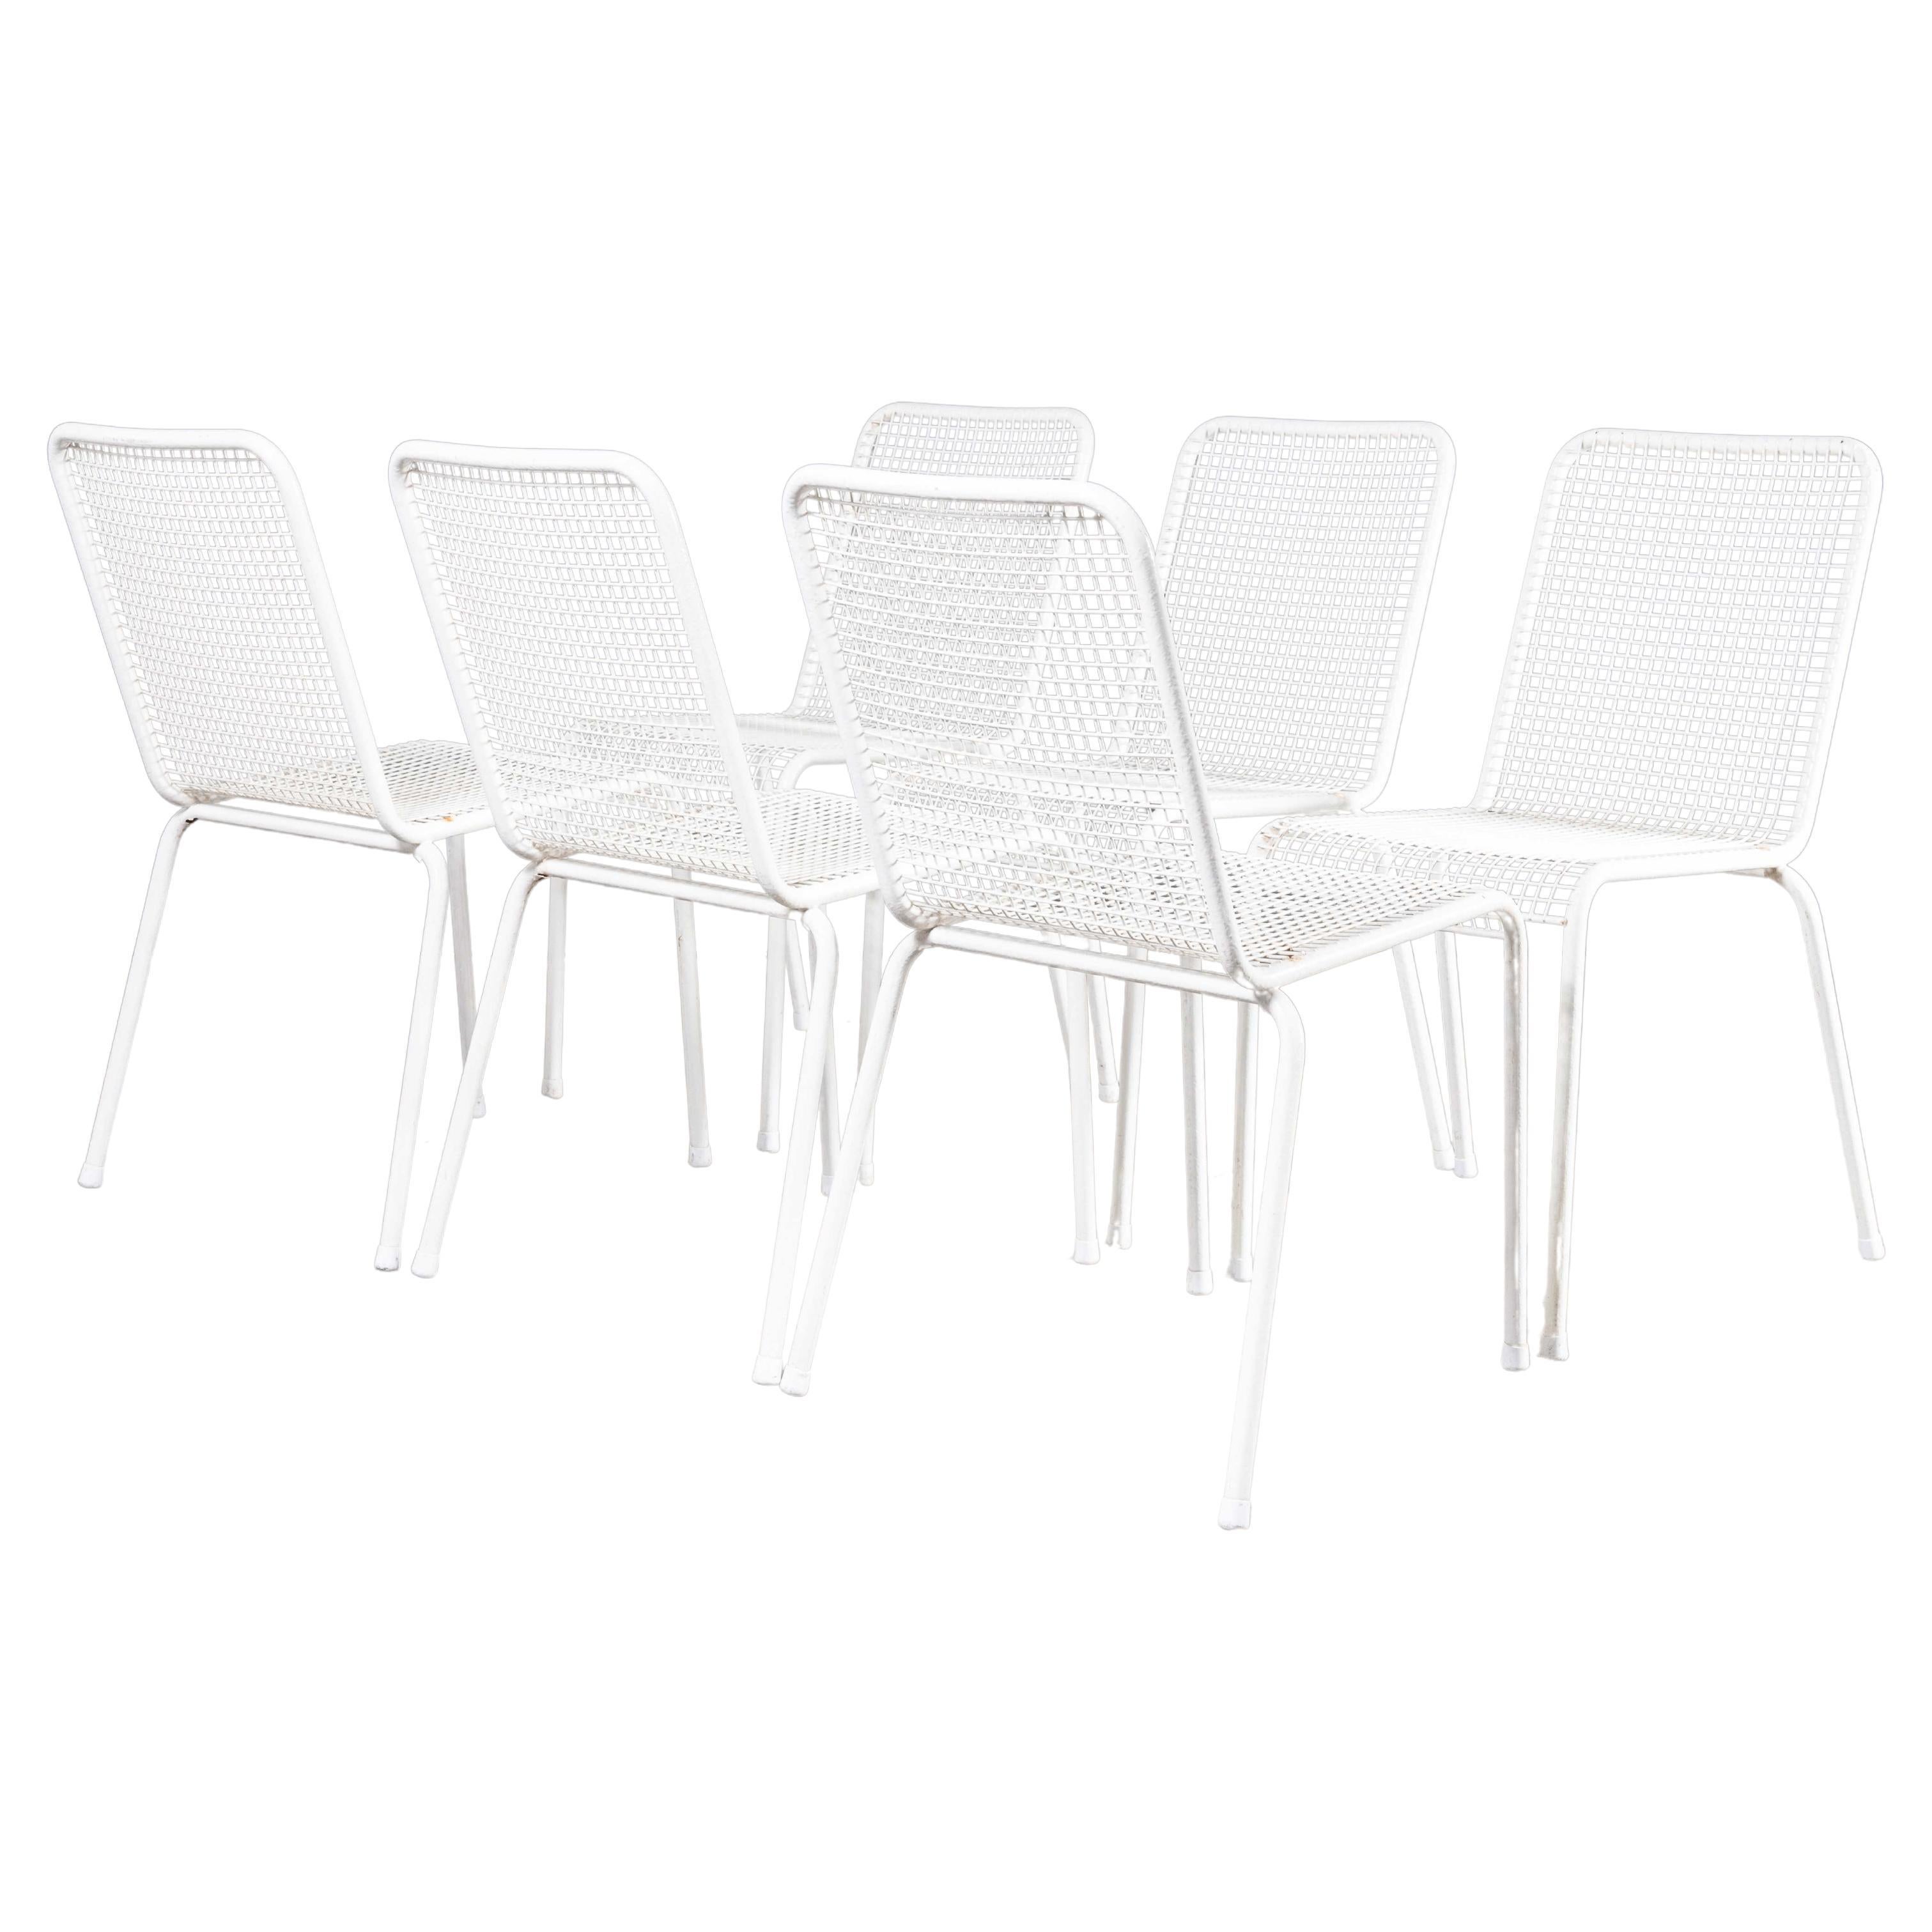 1970's French Original Wire Mesh White Outdoor Dining Chairs - Set Of Six For Sale